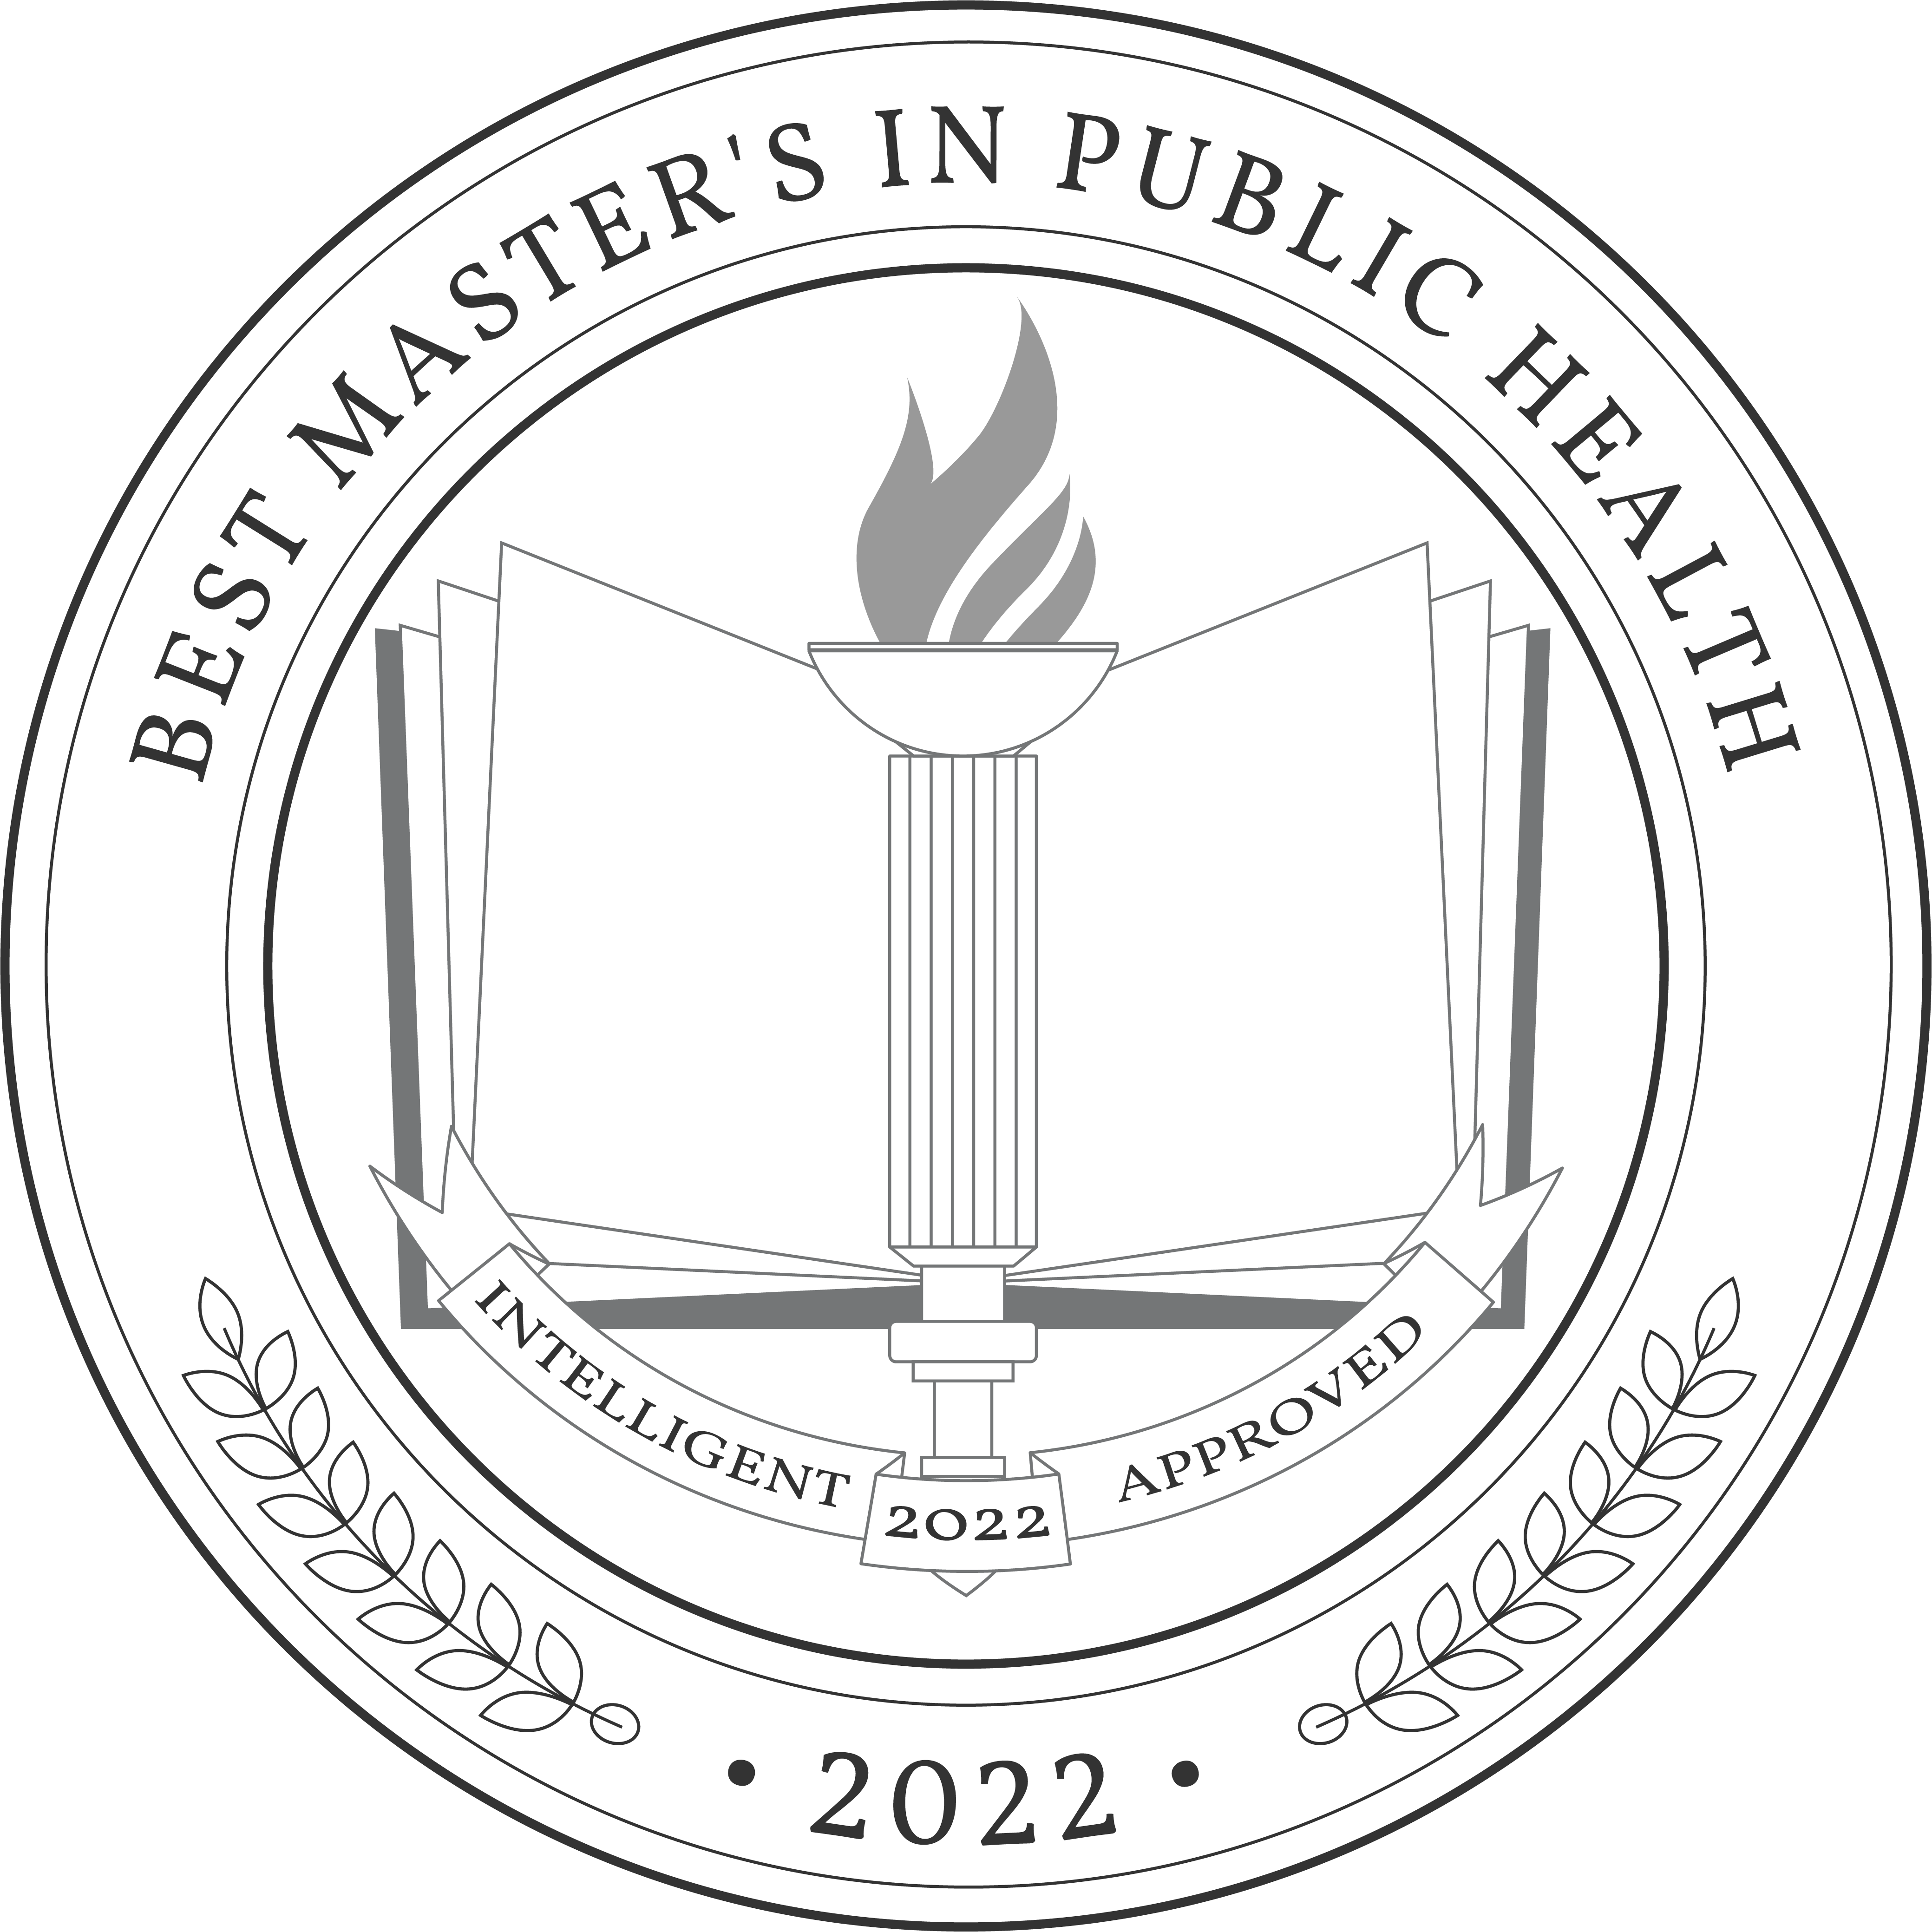 The Best Master's in Public Health